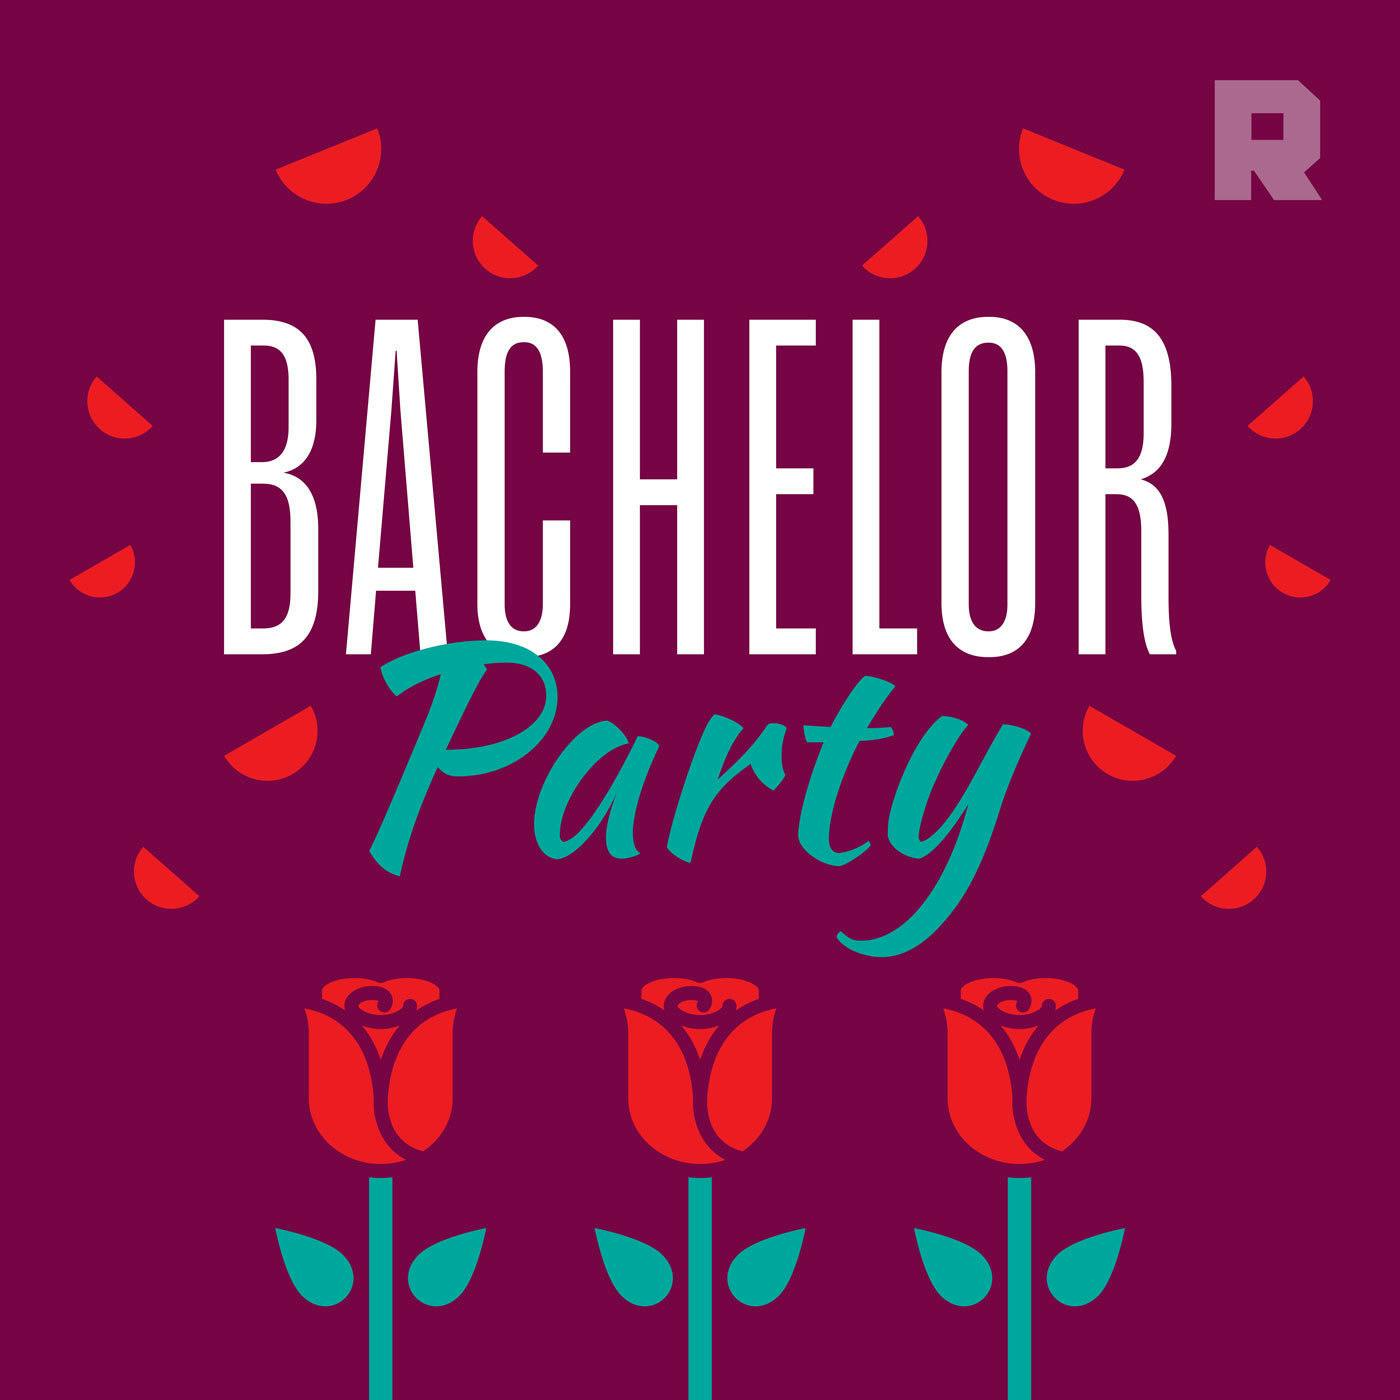 Miami Strip Clubs, Bad Pizza, and Stassi vs. Sandoval Round 2: Breaking Down ‘Vanderpump Rules’ S8E4 | Bachelor Party B-Side